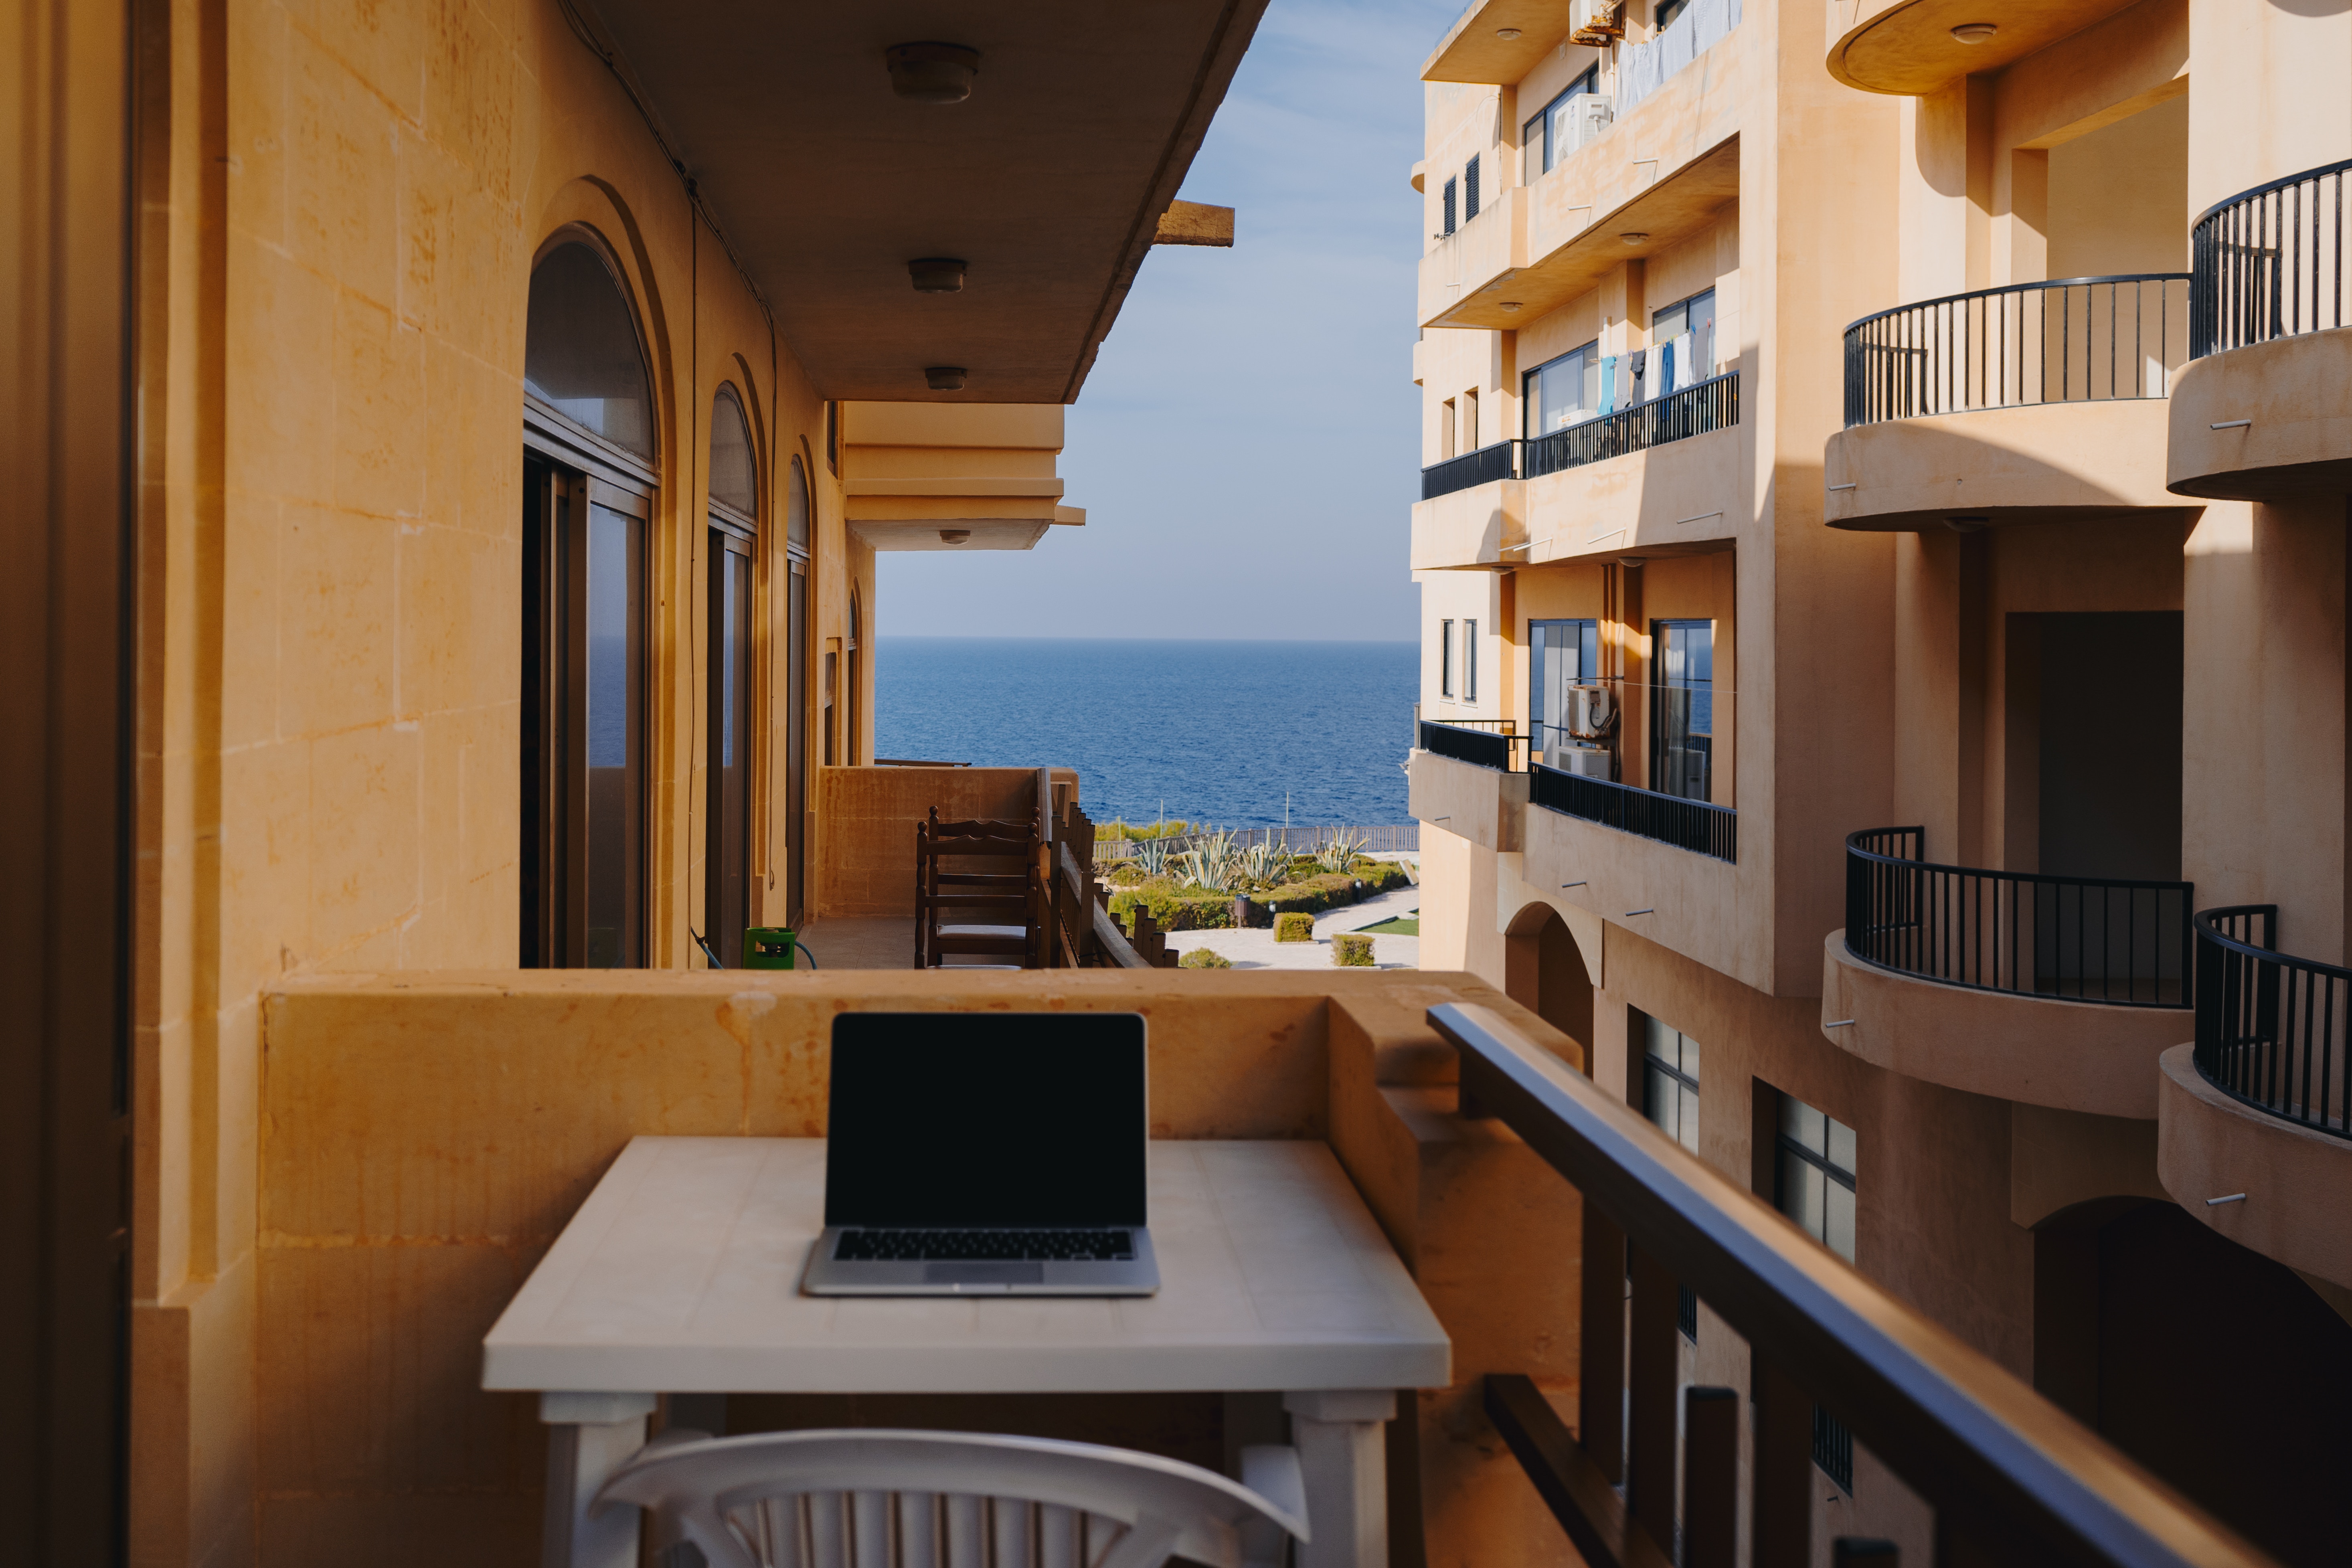 notebook, relaxation, laptop, malta download for free